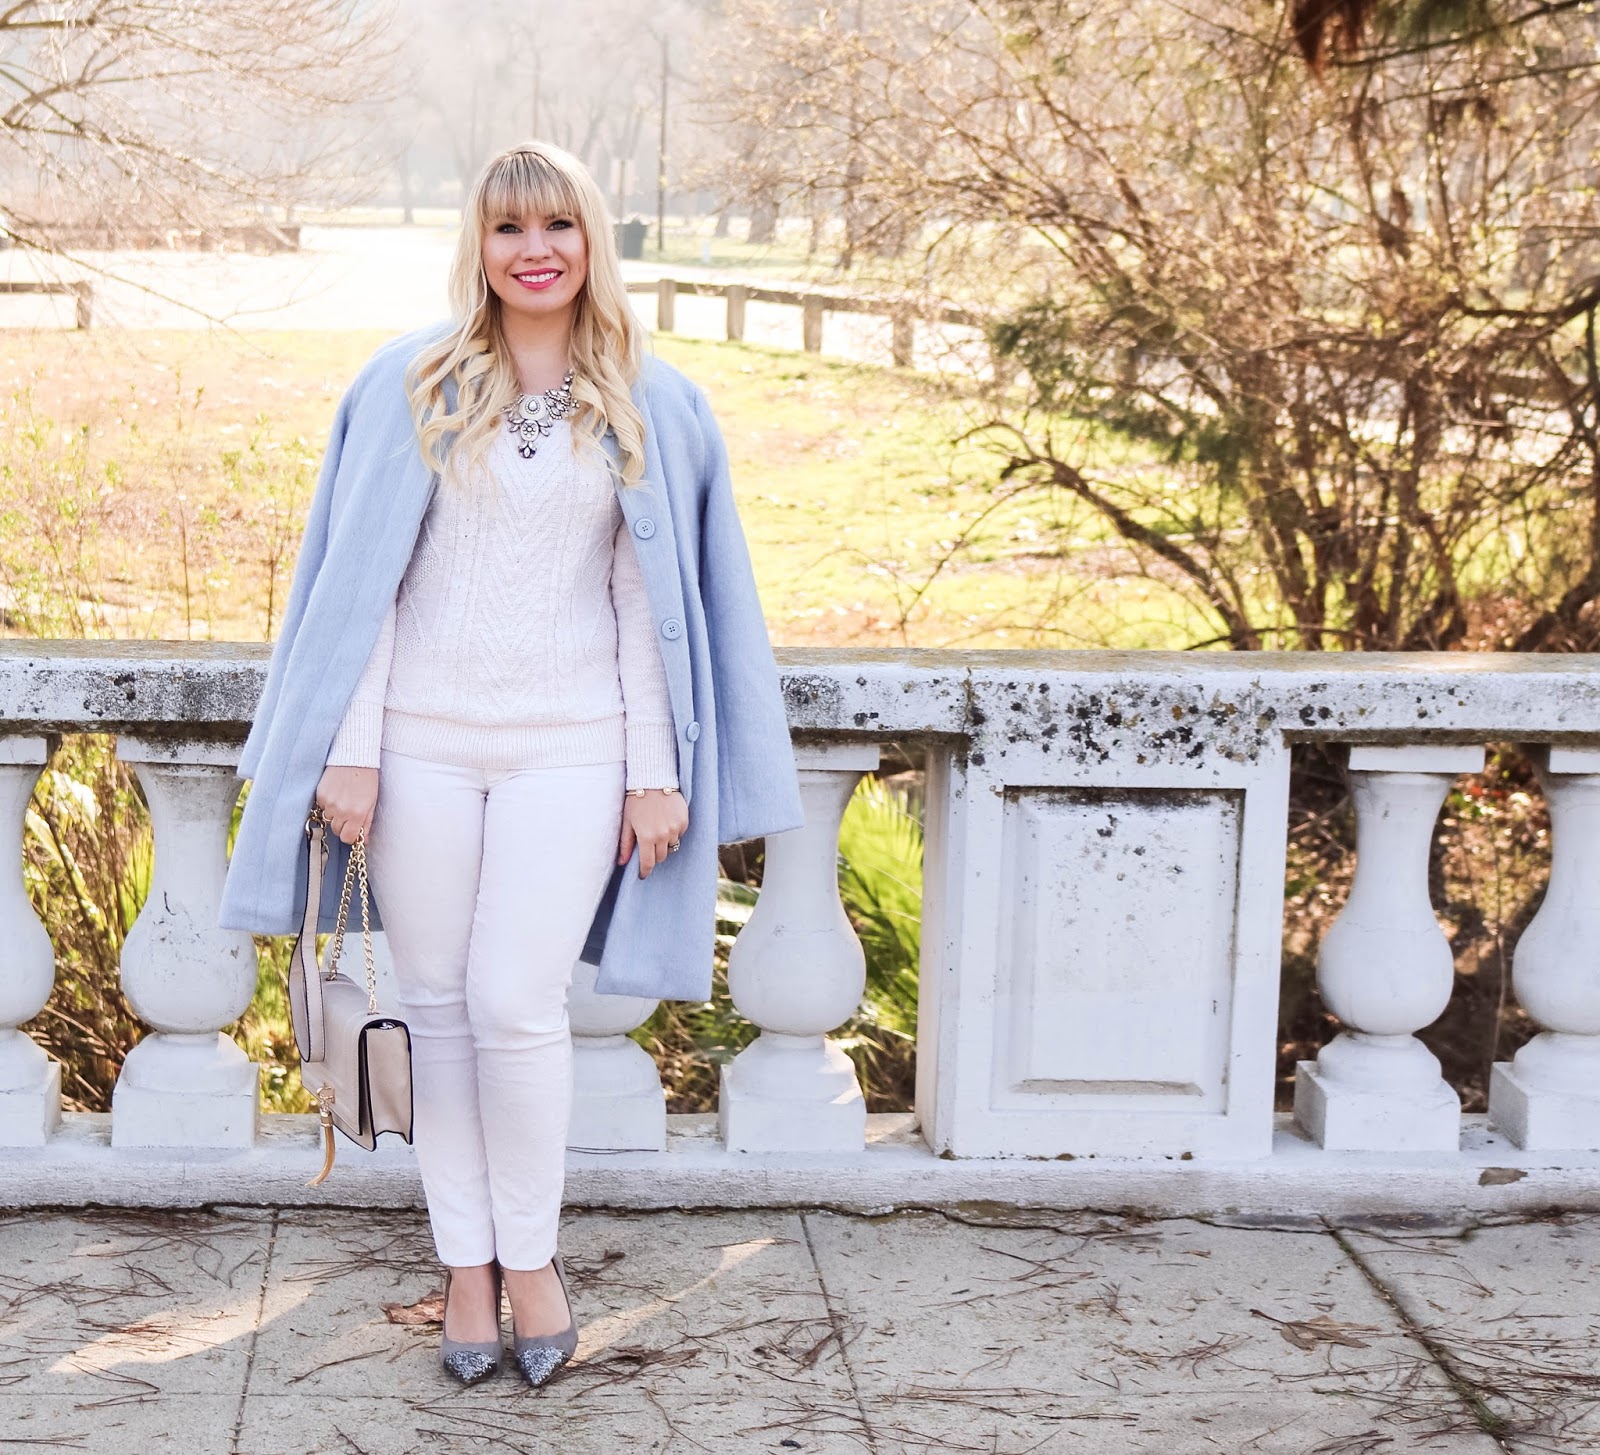 Feminine fashion blogger Lizzie in Lace shares a Light Blue and White Frozen Elsa Inspired Outfit